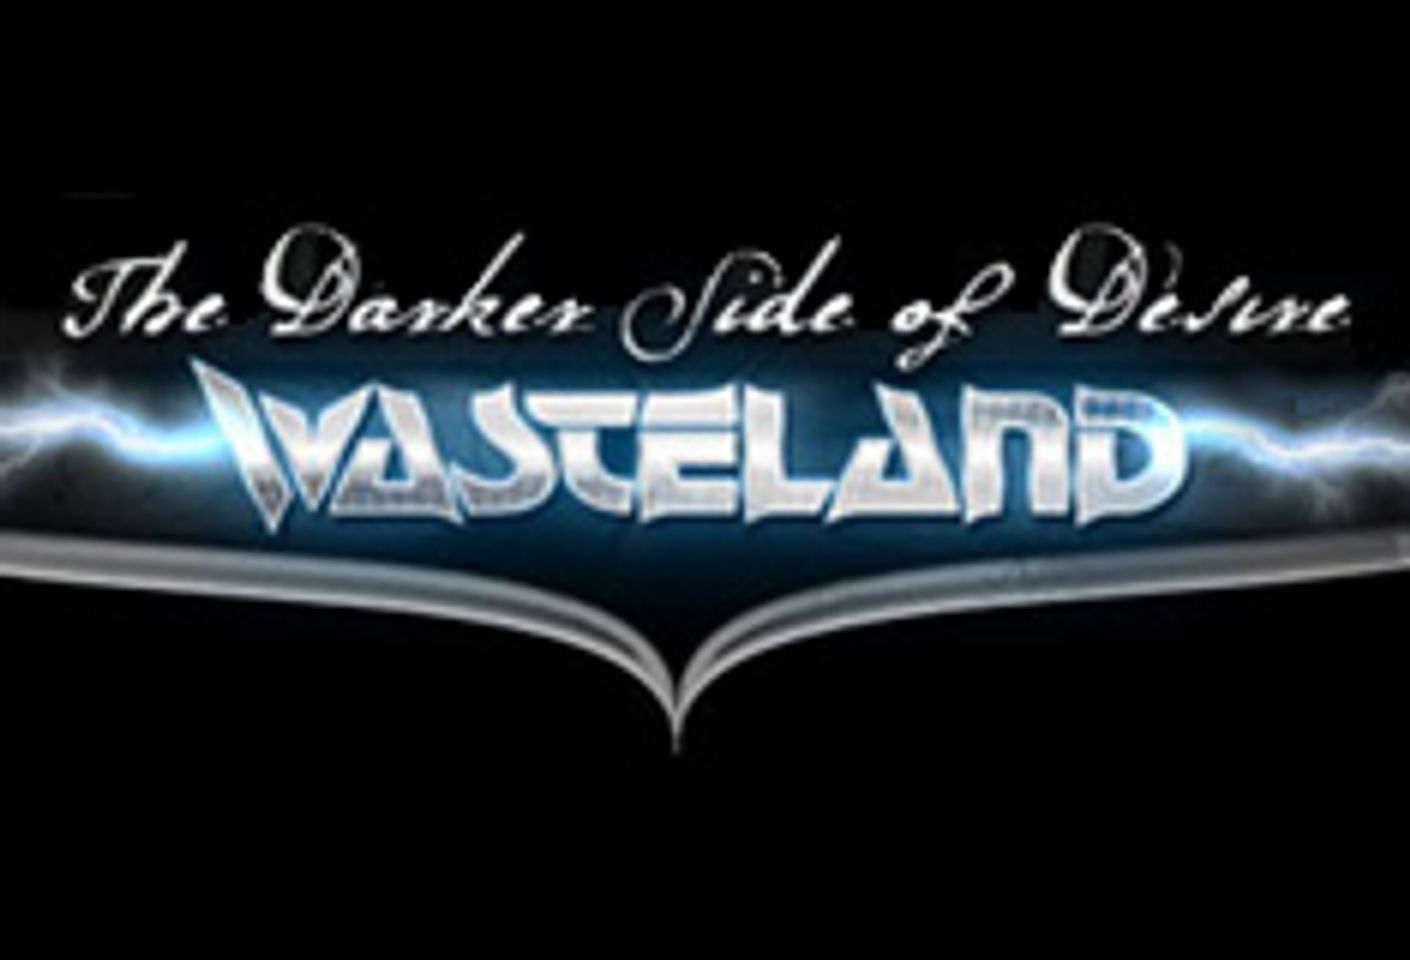 Wasteland Launches 'The Fifty-First Shade Of Submission, A 3D Virtual Experience' at the Adult Entertainment Virtual Convention this week.